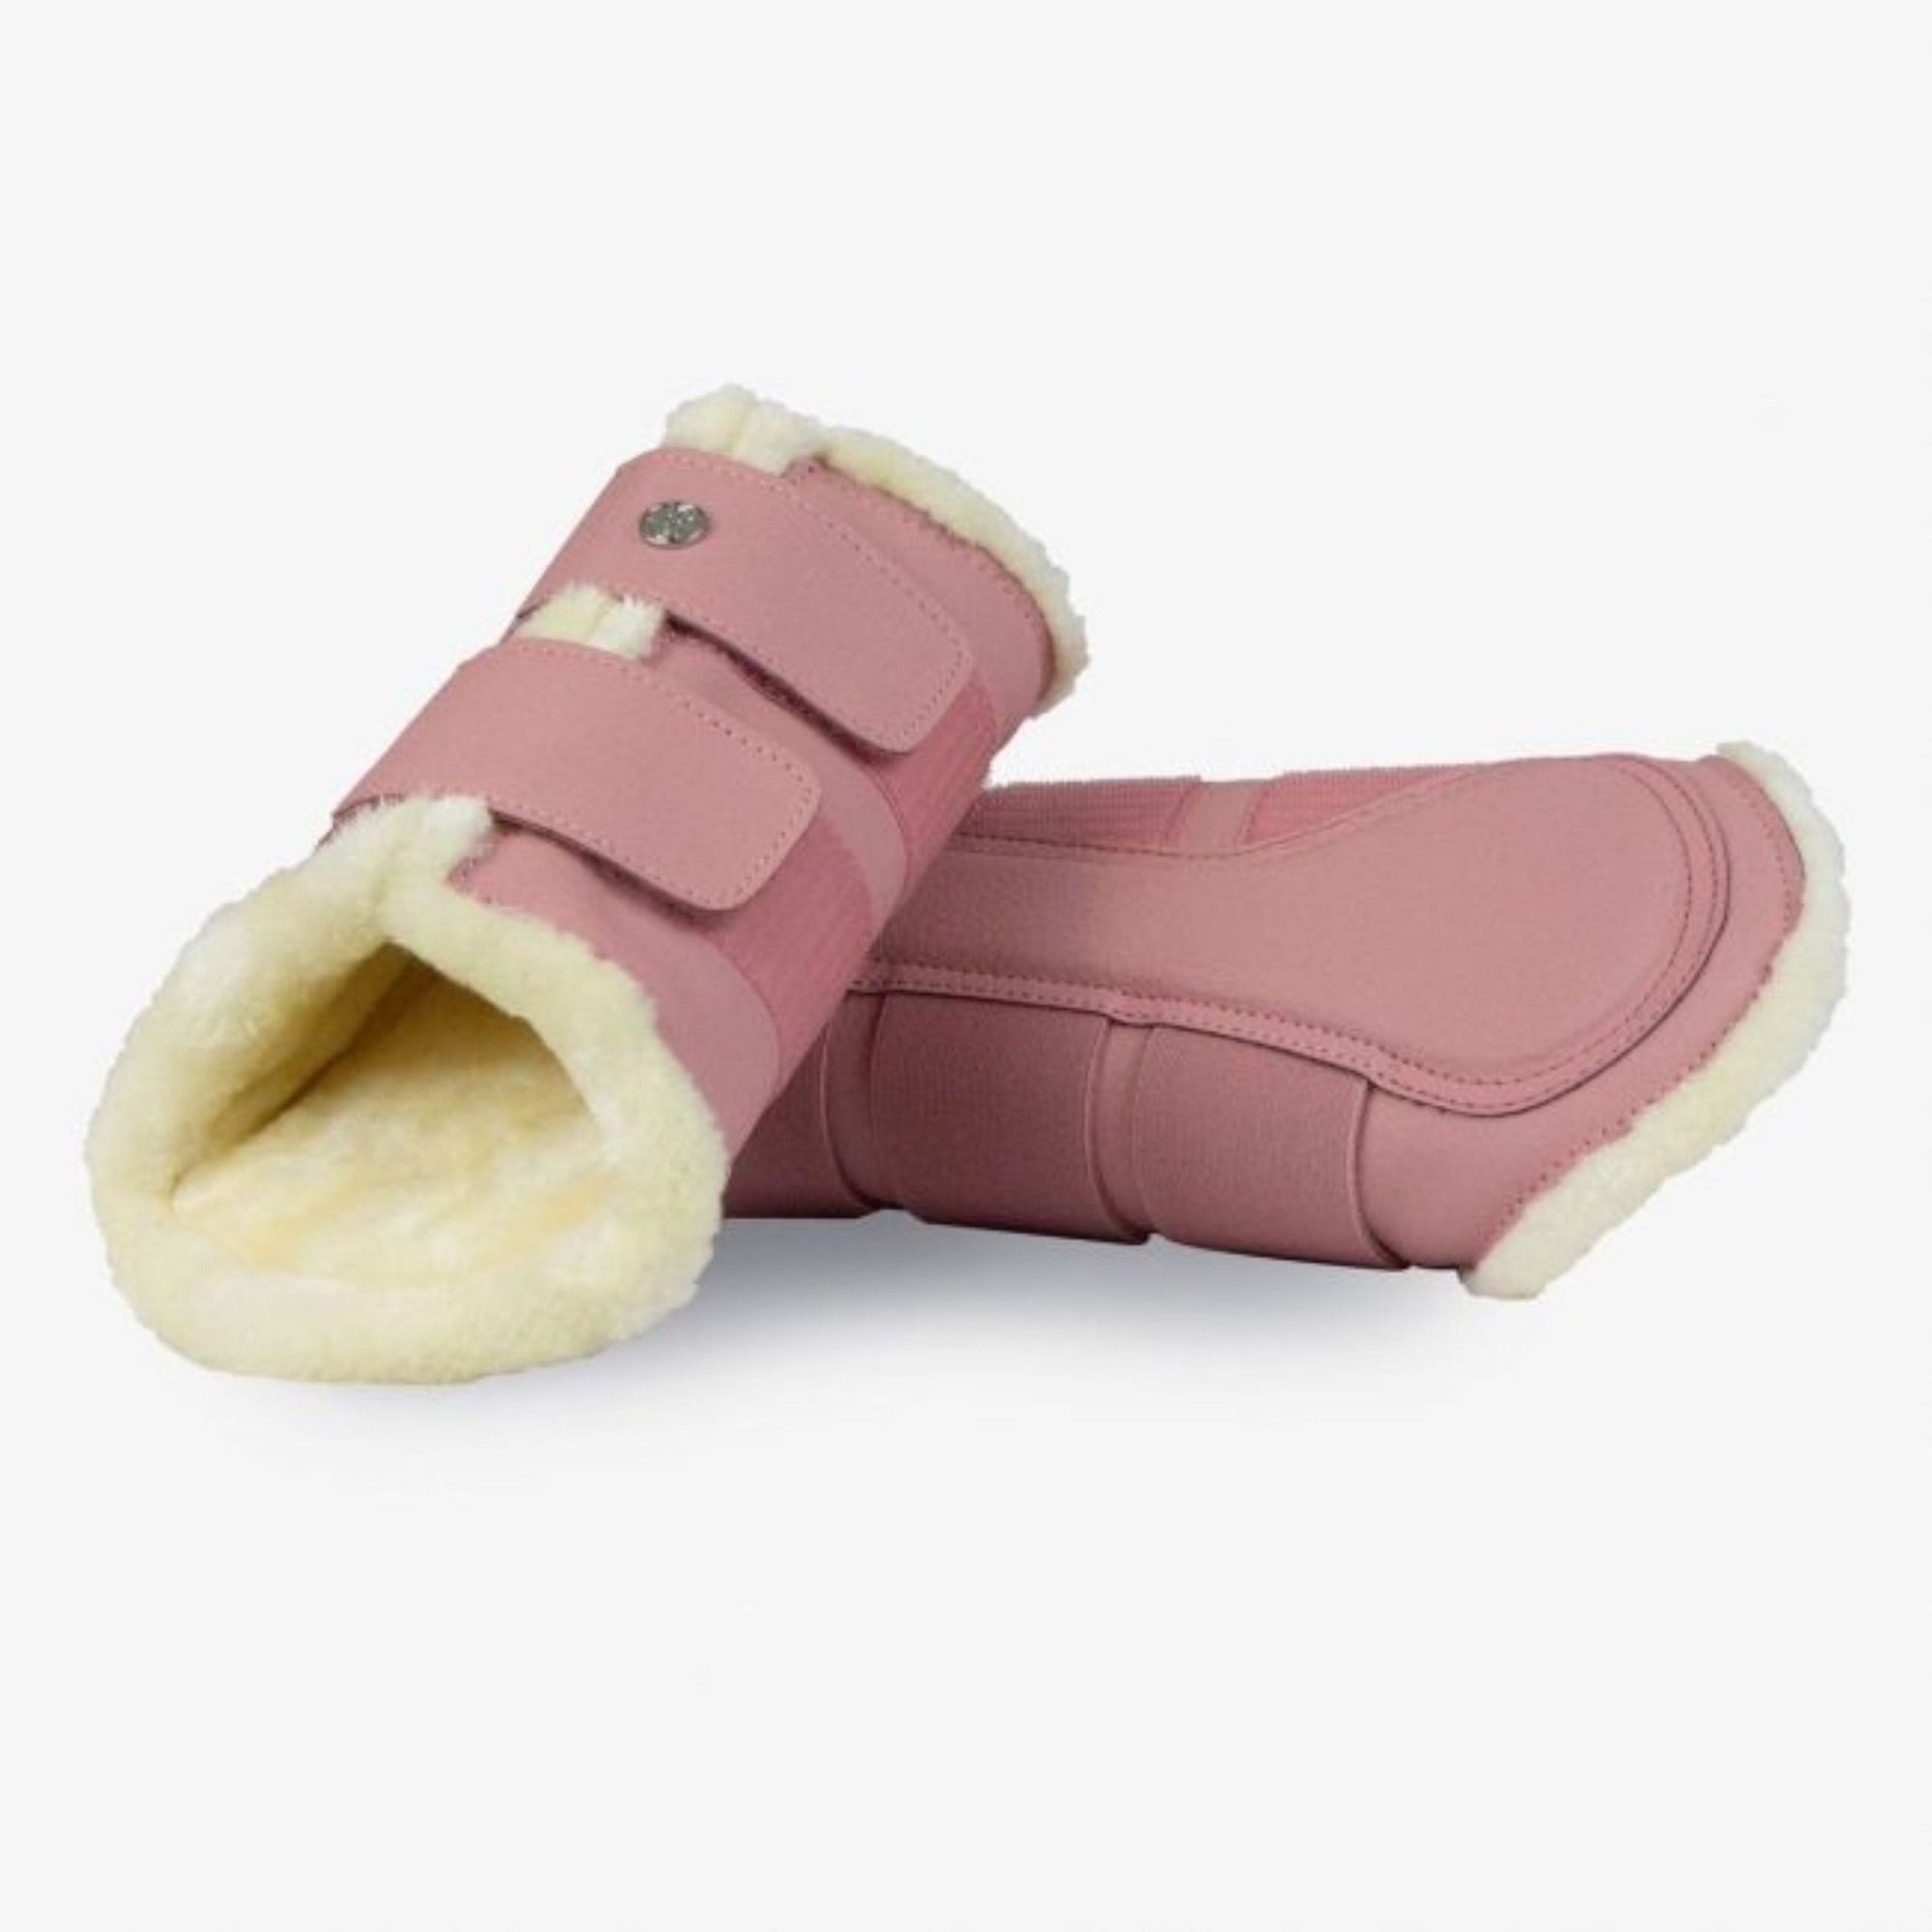 Blush colour brushing boots lined with white faux fur.